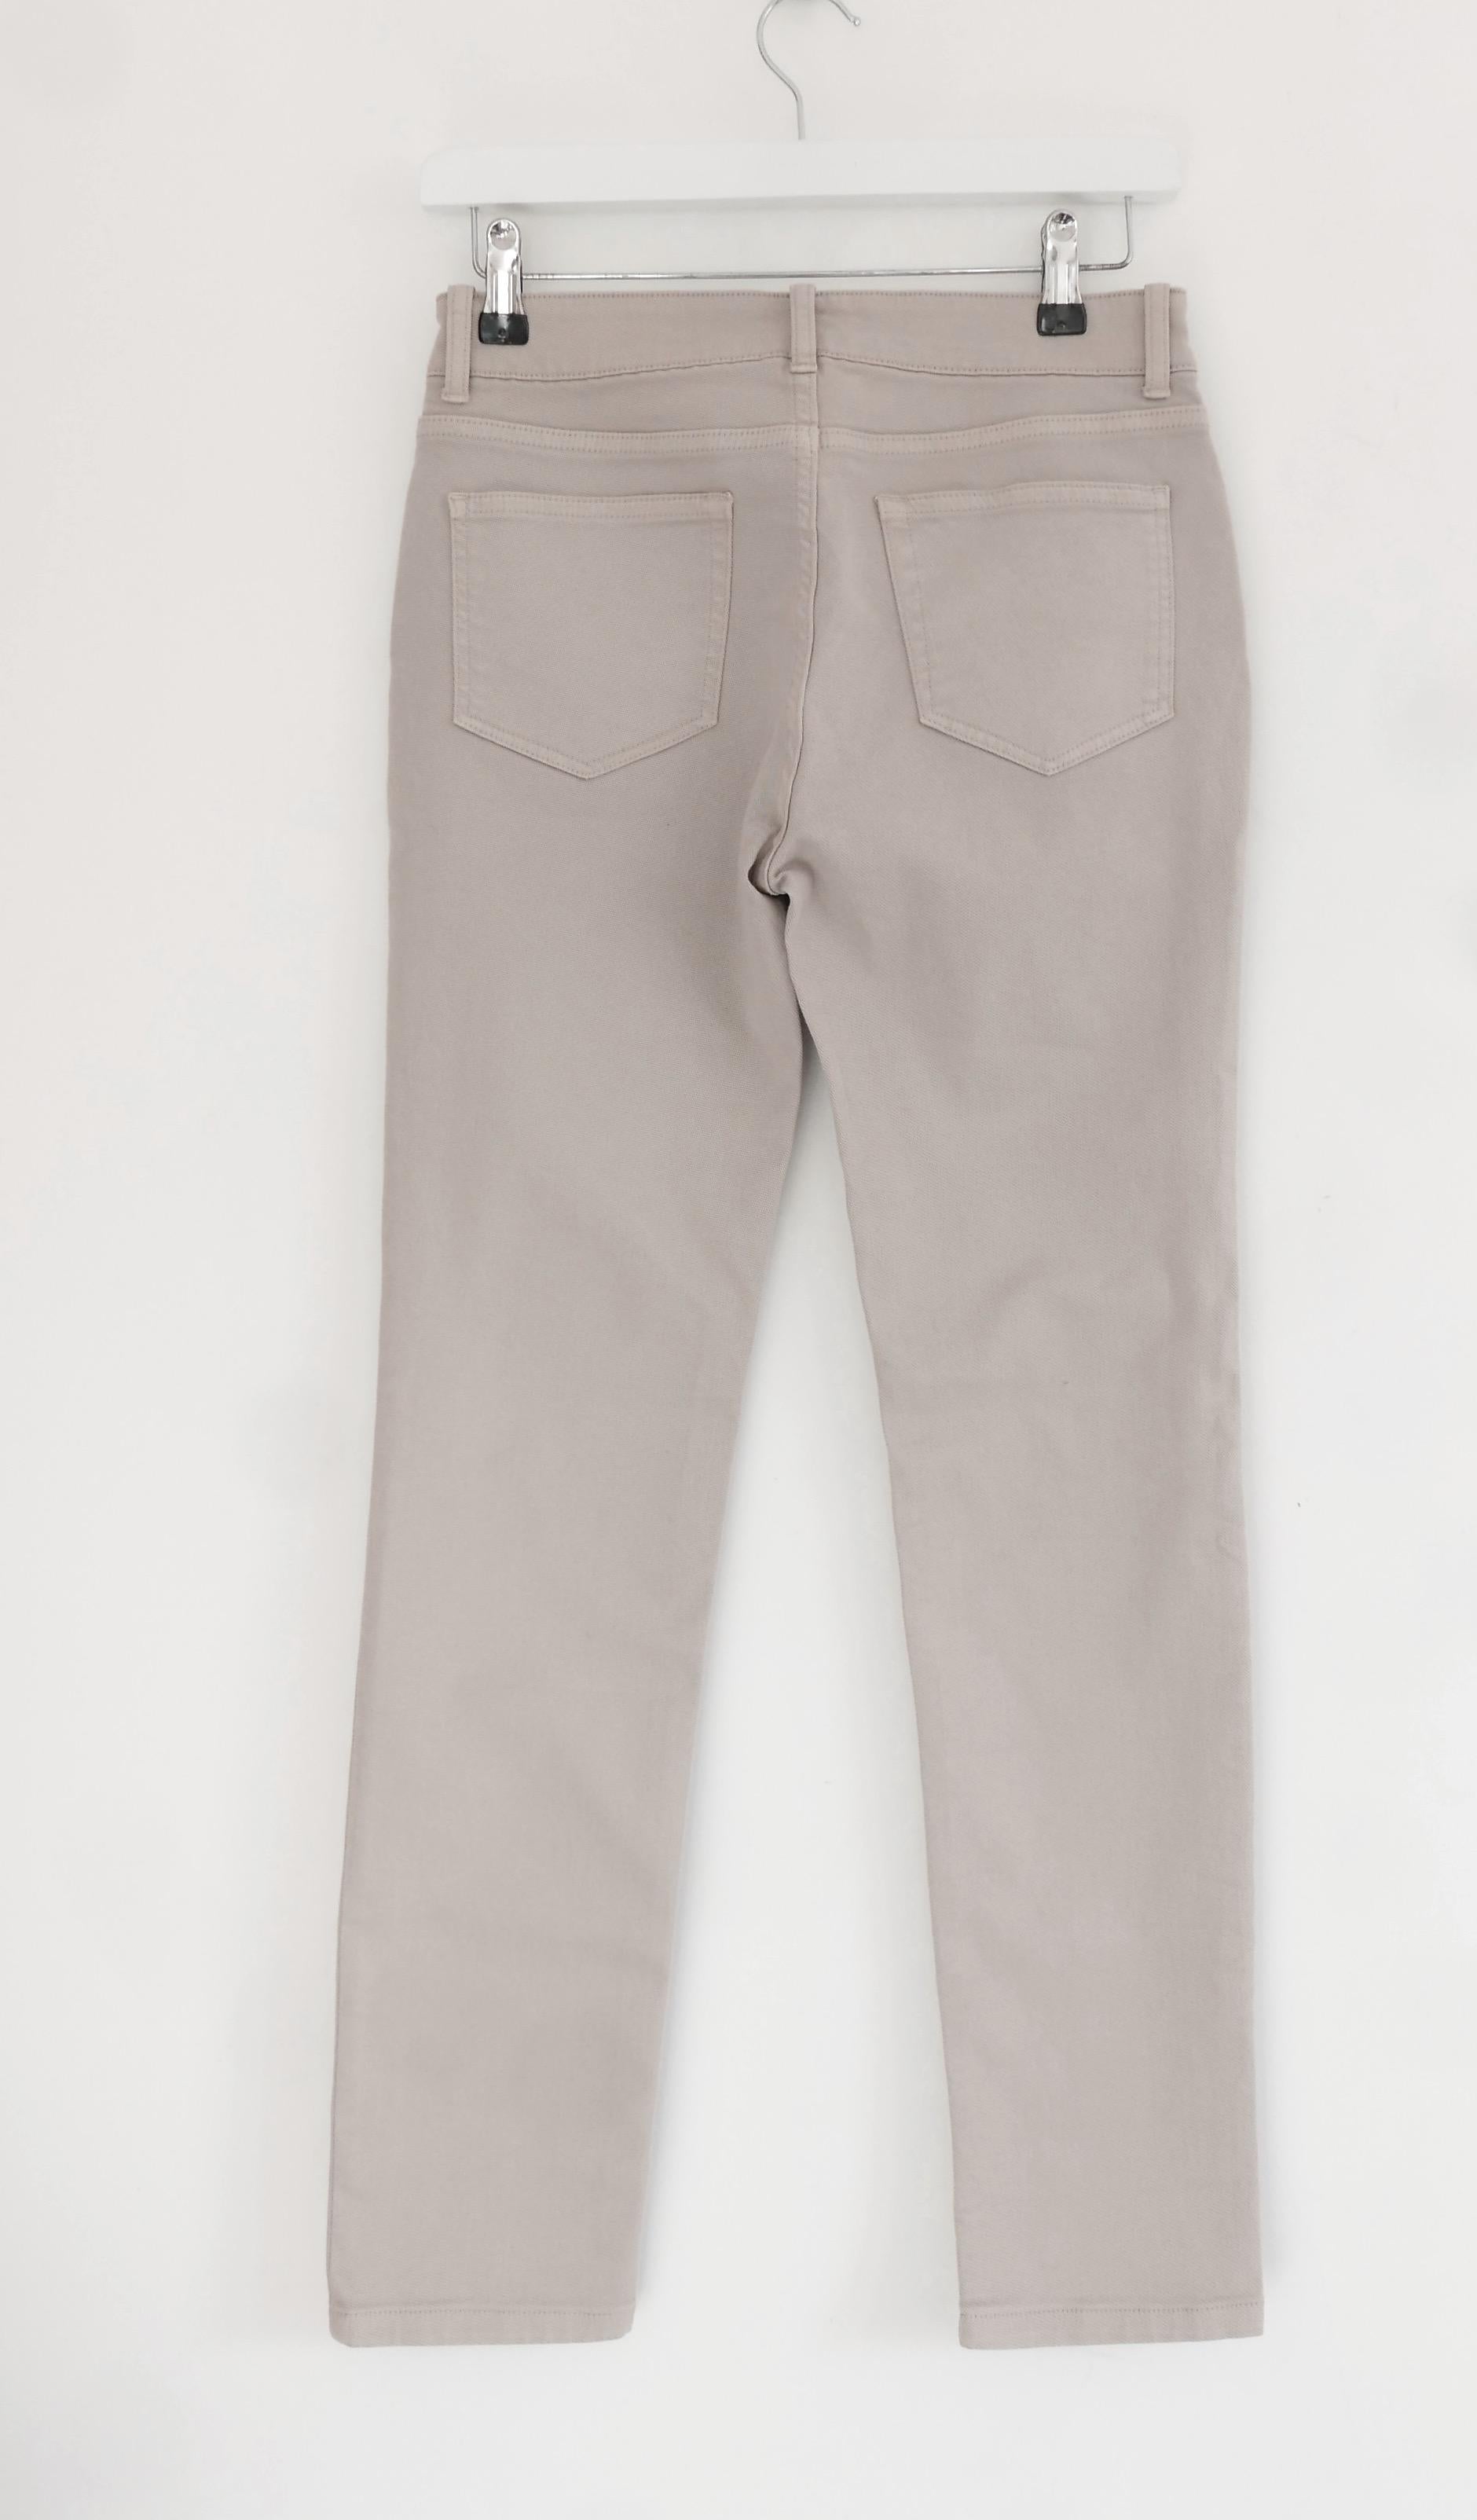 Loro Piana Mathias Light Denim Trousers In New Condition For Sale In London, GB